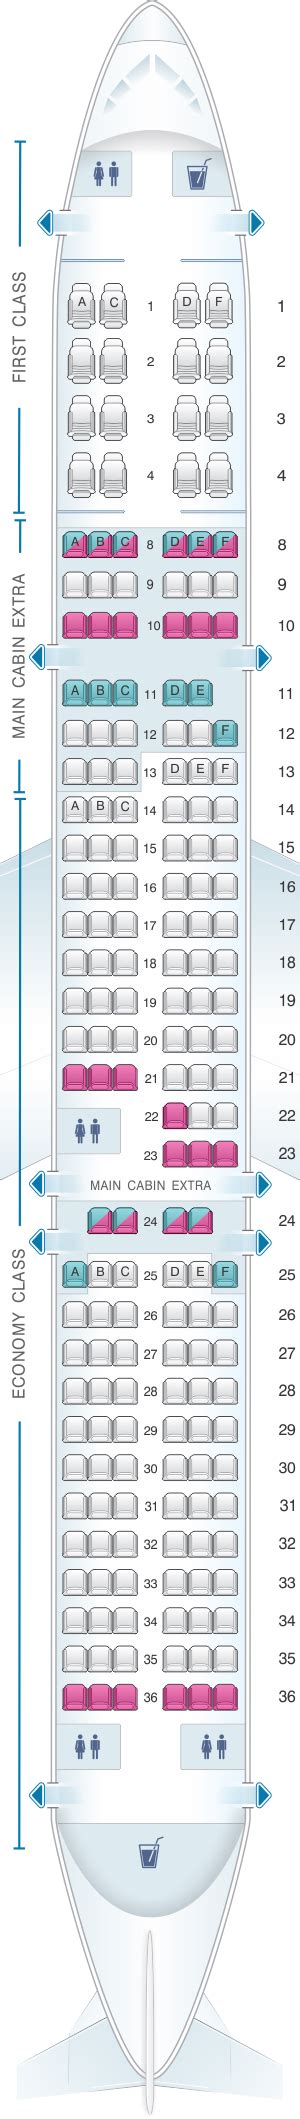 local_pizza. Food & Snacks. Seat 4F is a standard first class window seat with 38" of seat pitch, which is average across Airbus A321's worldwide. 4F is has a bulkhead behind it, which means there's nobody behind you to bump or kick your seat, but your seat recline may be slightly limited..